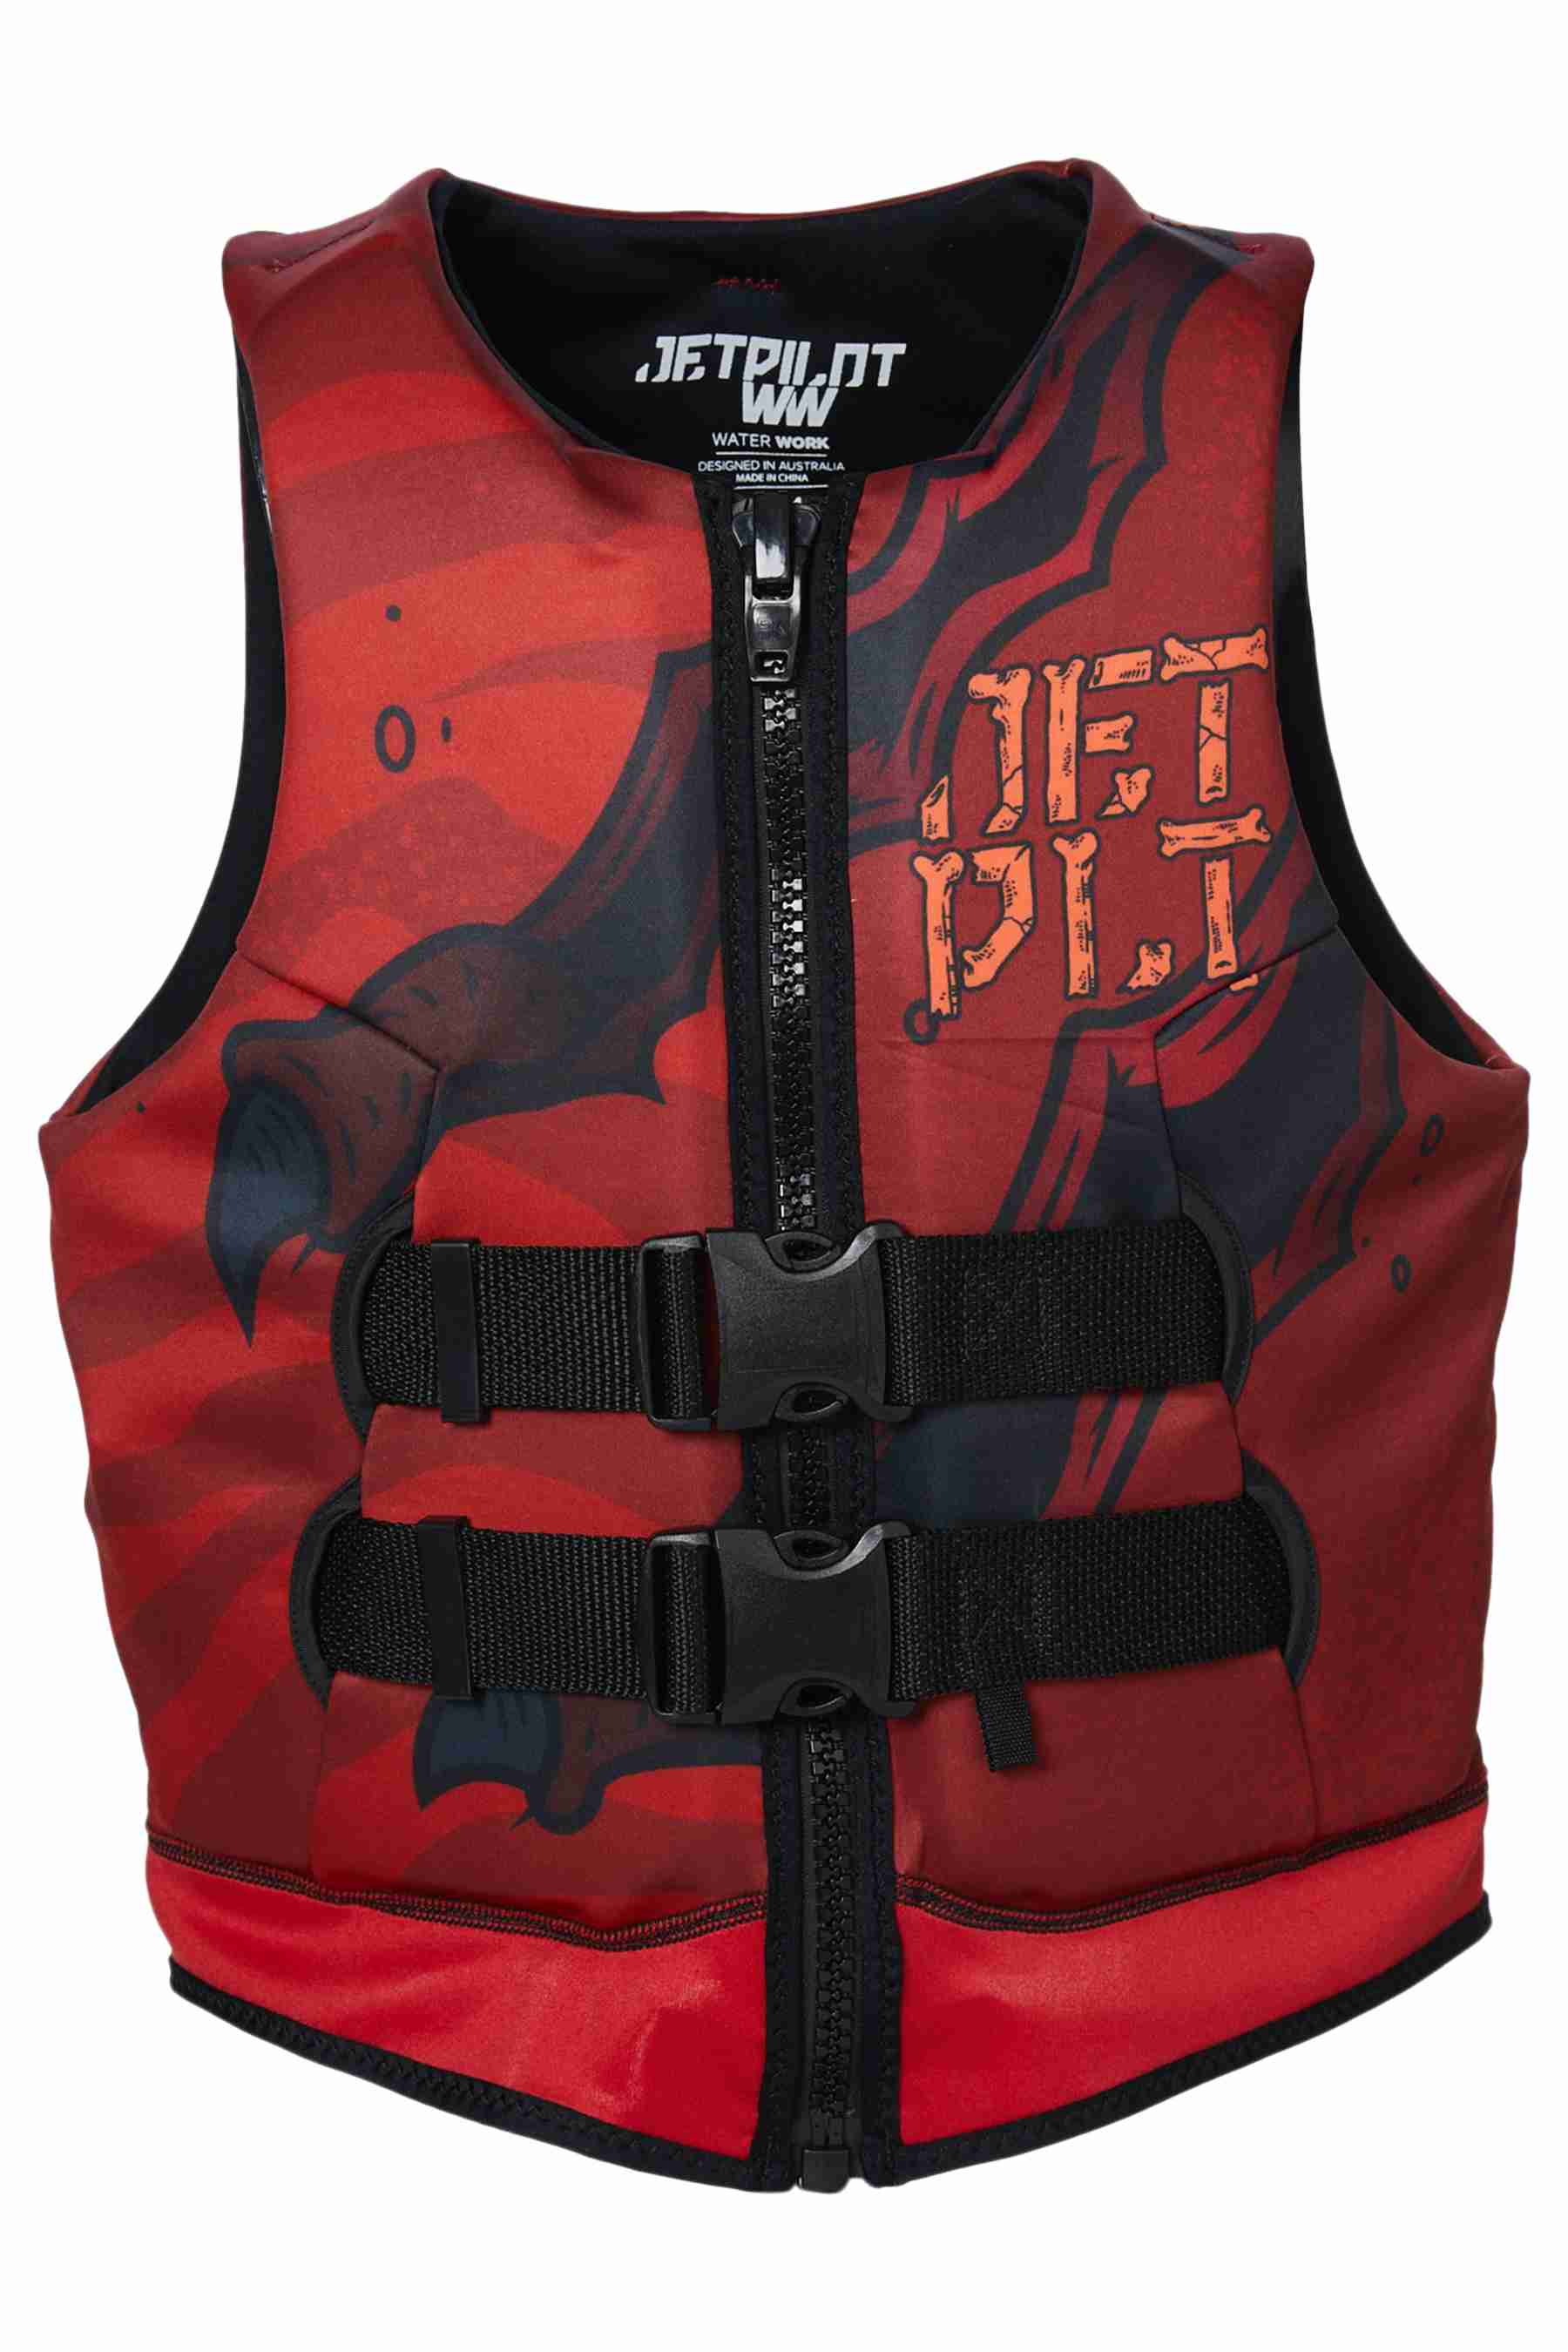 BOYS REX YOUTH CAUSE NEO VEST Red